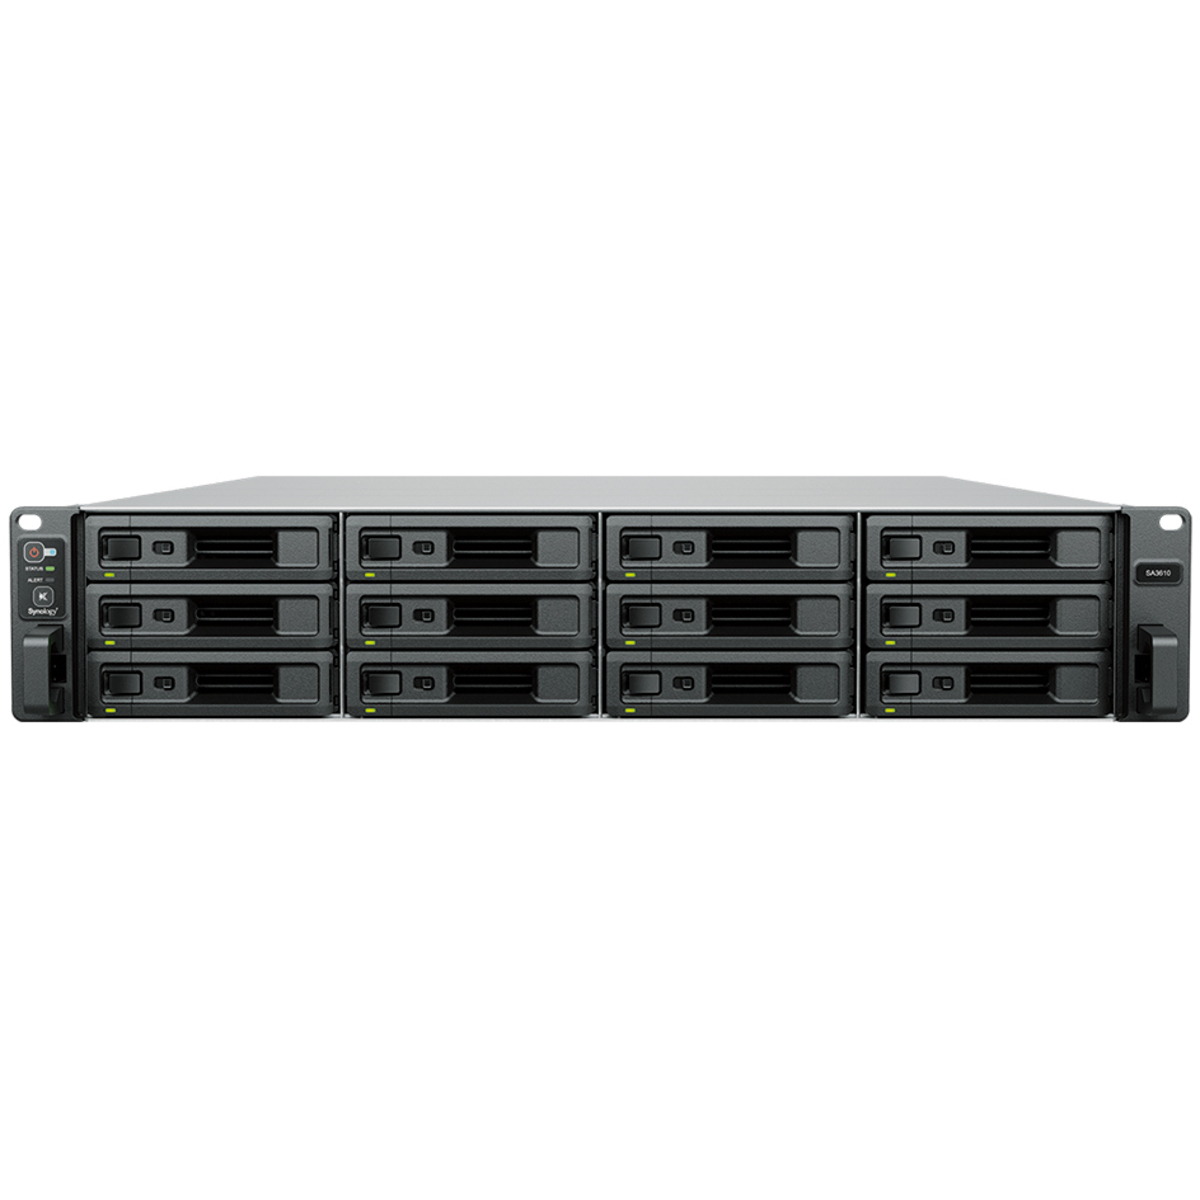 Synology RackStation SA3410 216tb 12-Bay RackMount Large Business / Enterprise NAS - Network Attached Storage Device 12x18tb Western Digital Ultrastar DC HC550 WUH721818ALE6L4 3.5 7200rpm SATA 6Gb/s HDD ENTERPRISE Class Drives Installed - Burn-In Tested RackStation SA3410